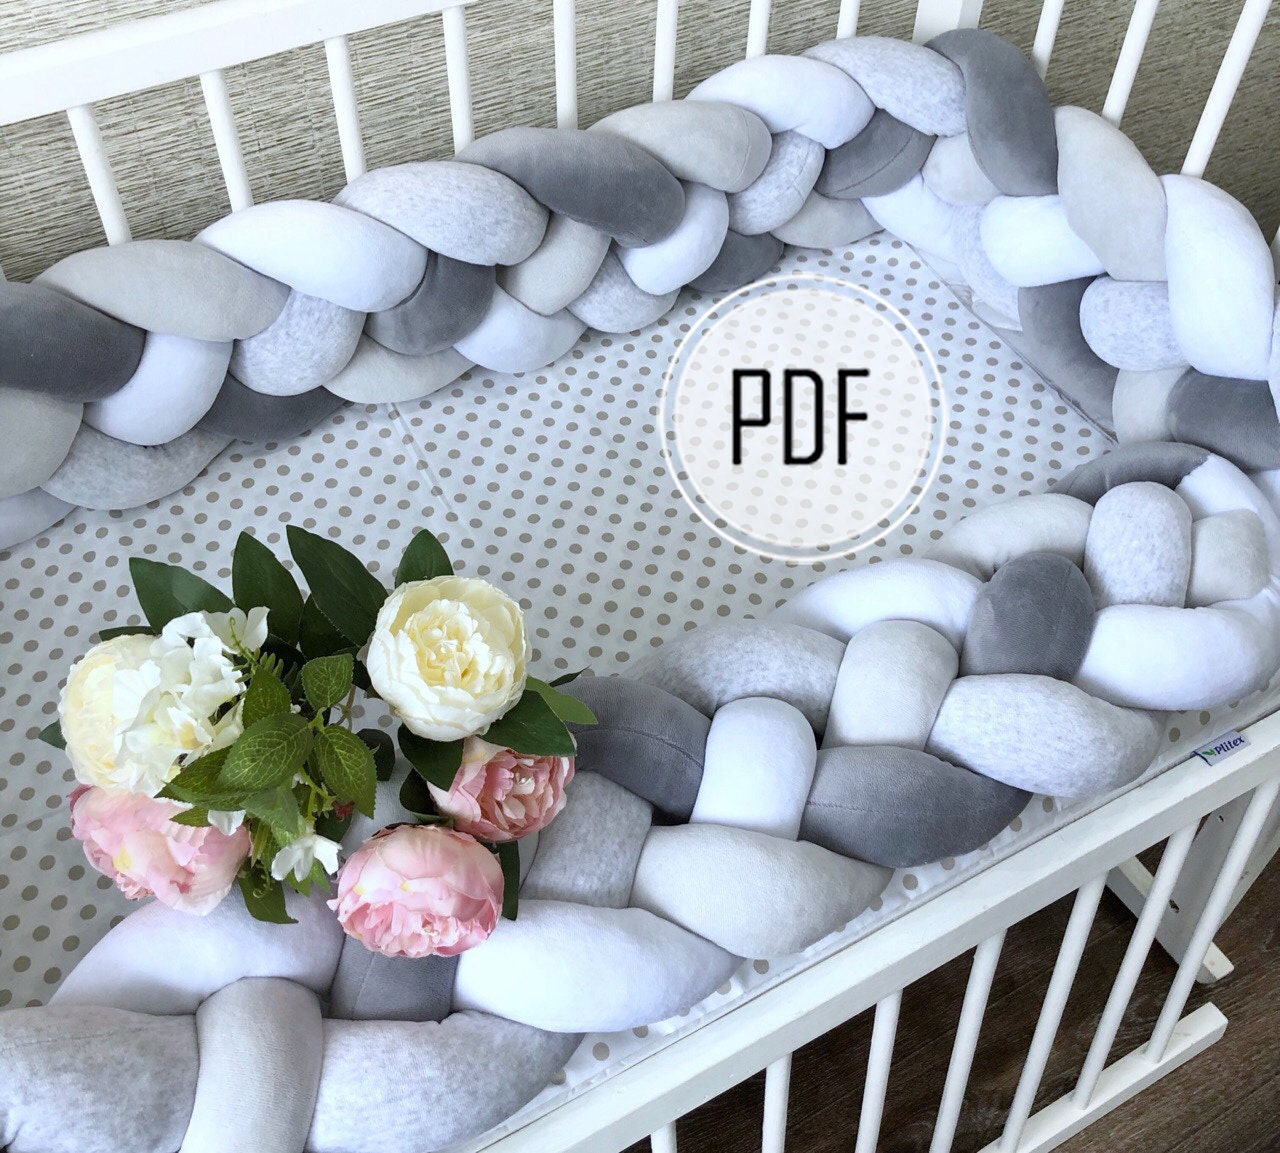 White-Green-Grey, 79 Infant Soft Pad Braided Crib Bumper Knot Pillow Cushion Cradle Decor for Baby Girl and Boy 